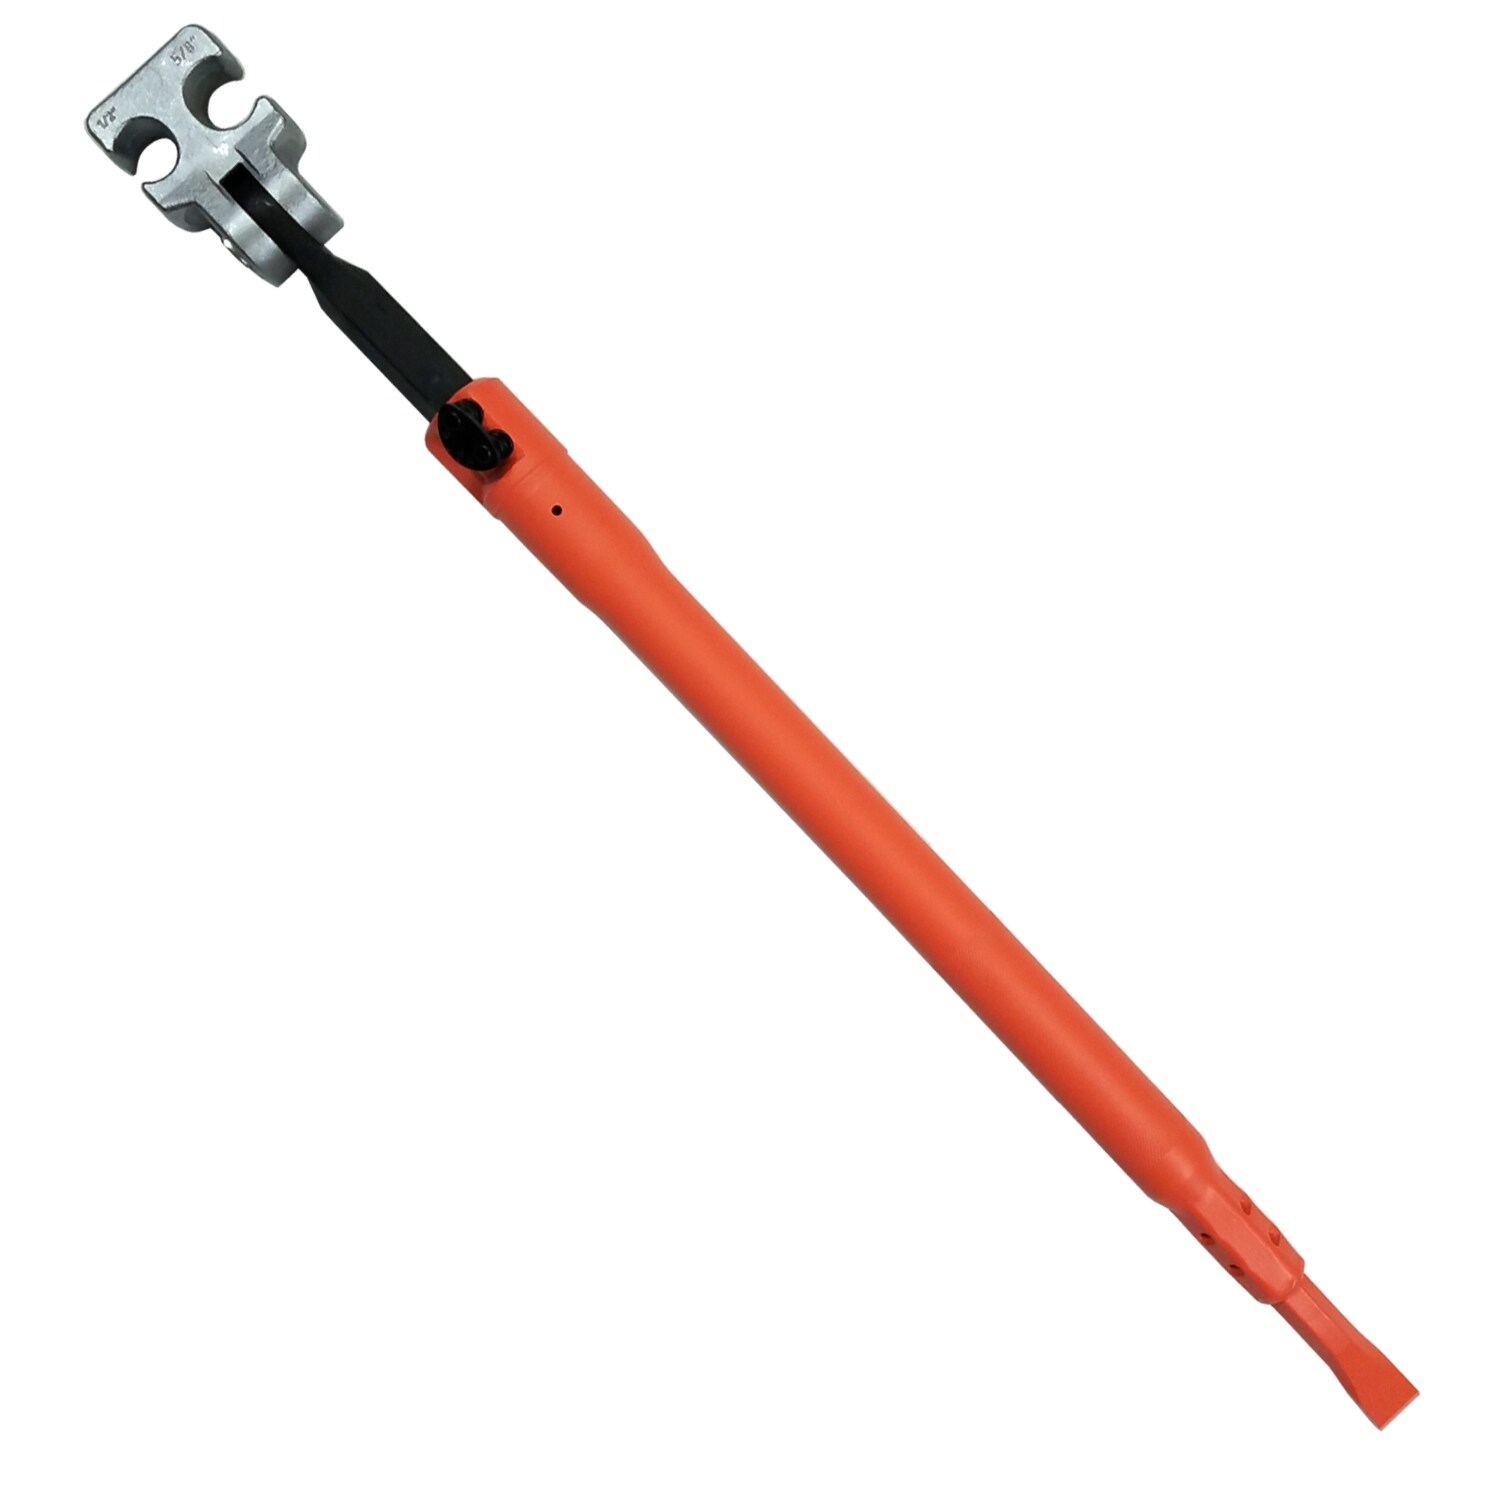 Bon Tool 24 in. Double End Rebar Hickey Bender for #3/#4 Rebar in